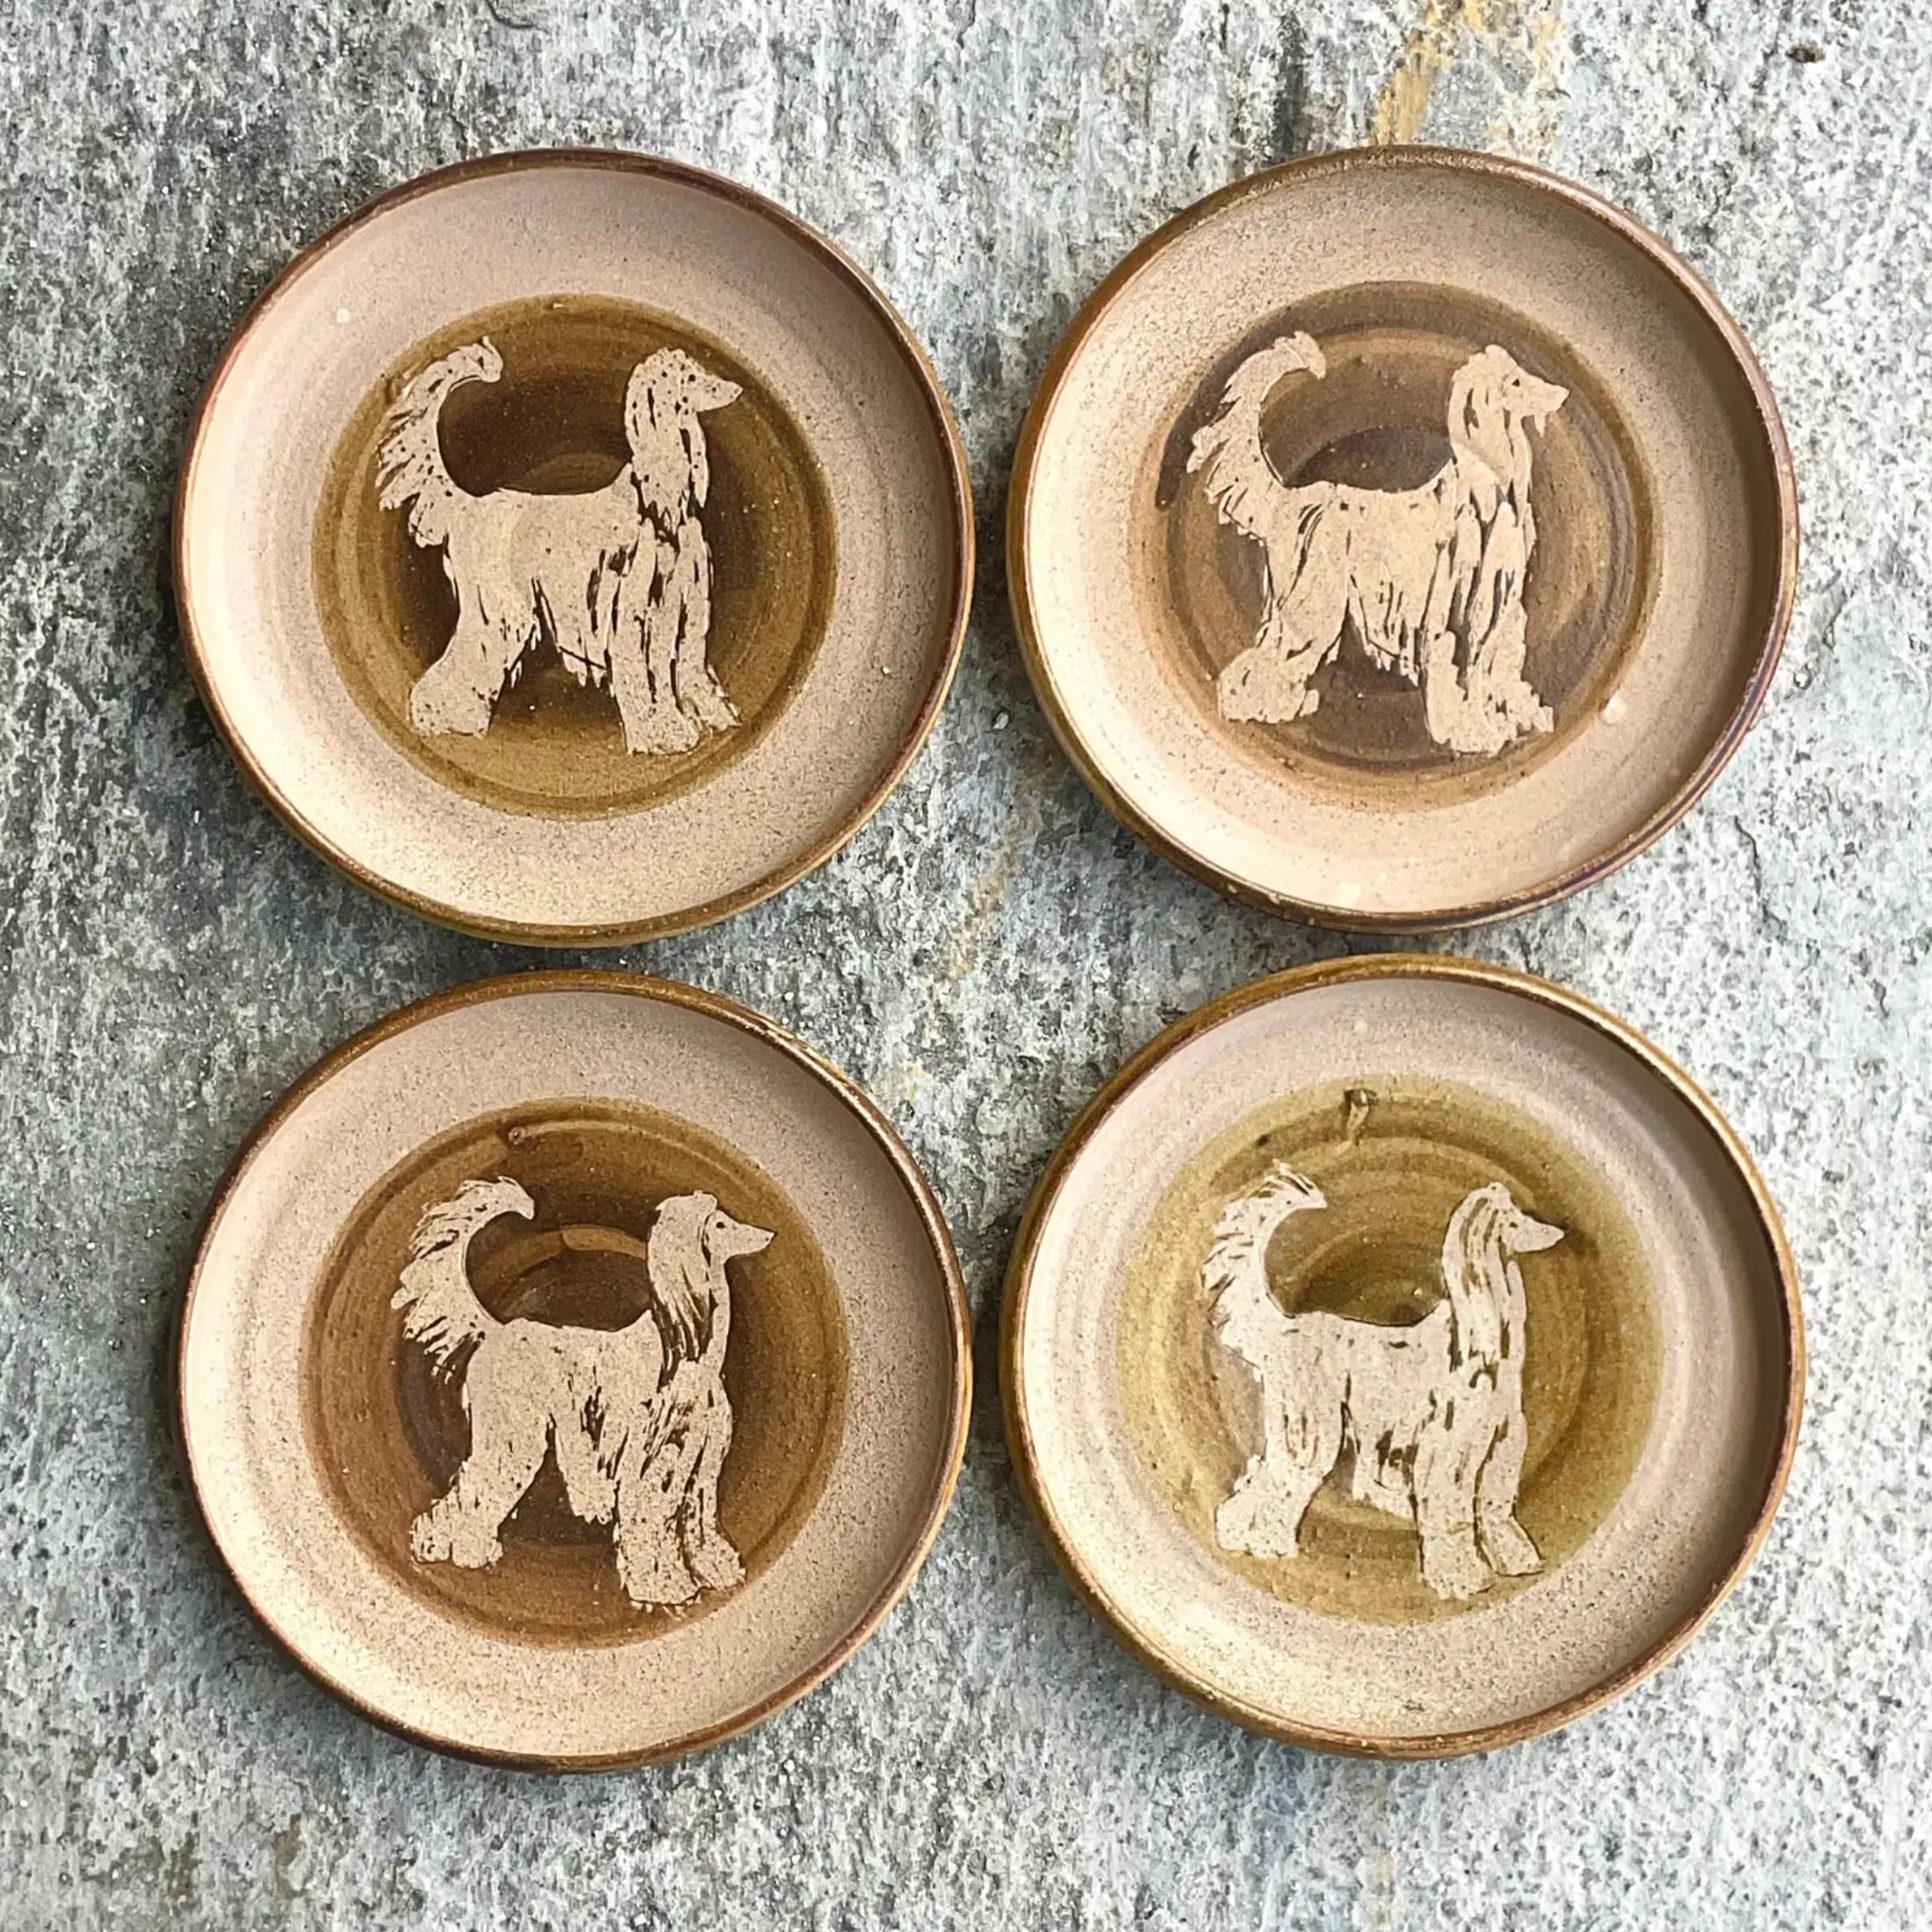 Bohemian Vintage Boho Signed Studio Pottery Plates With Afghan Dogs - Set of 4 For Sale